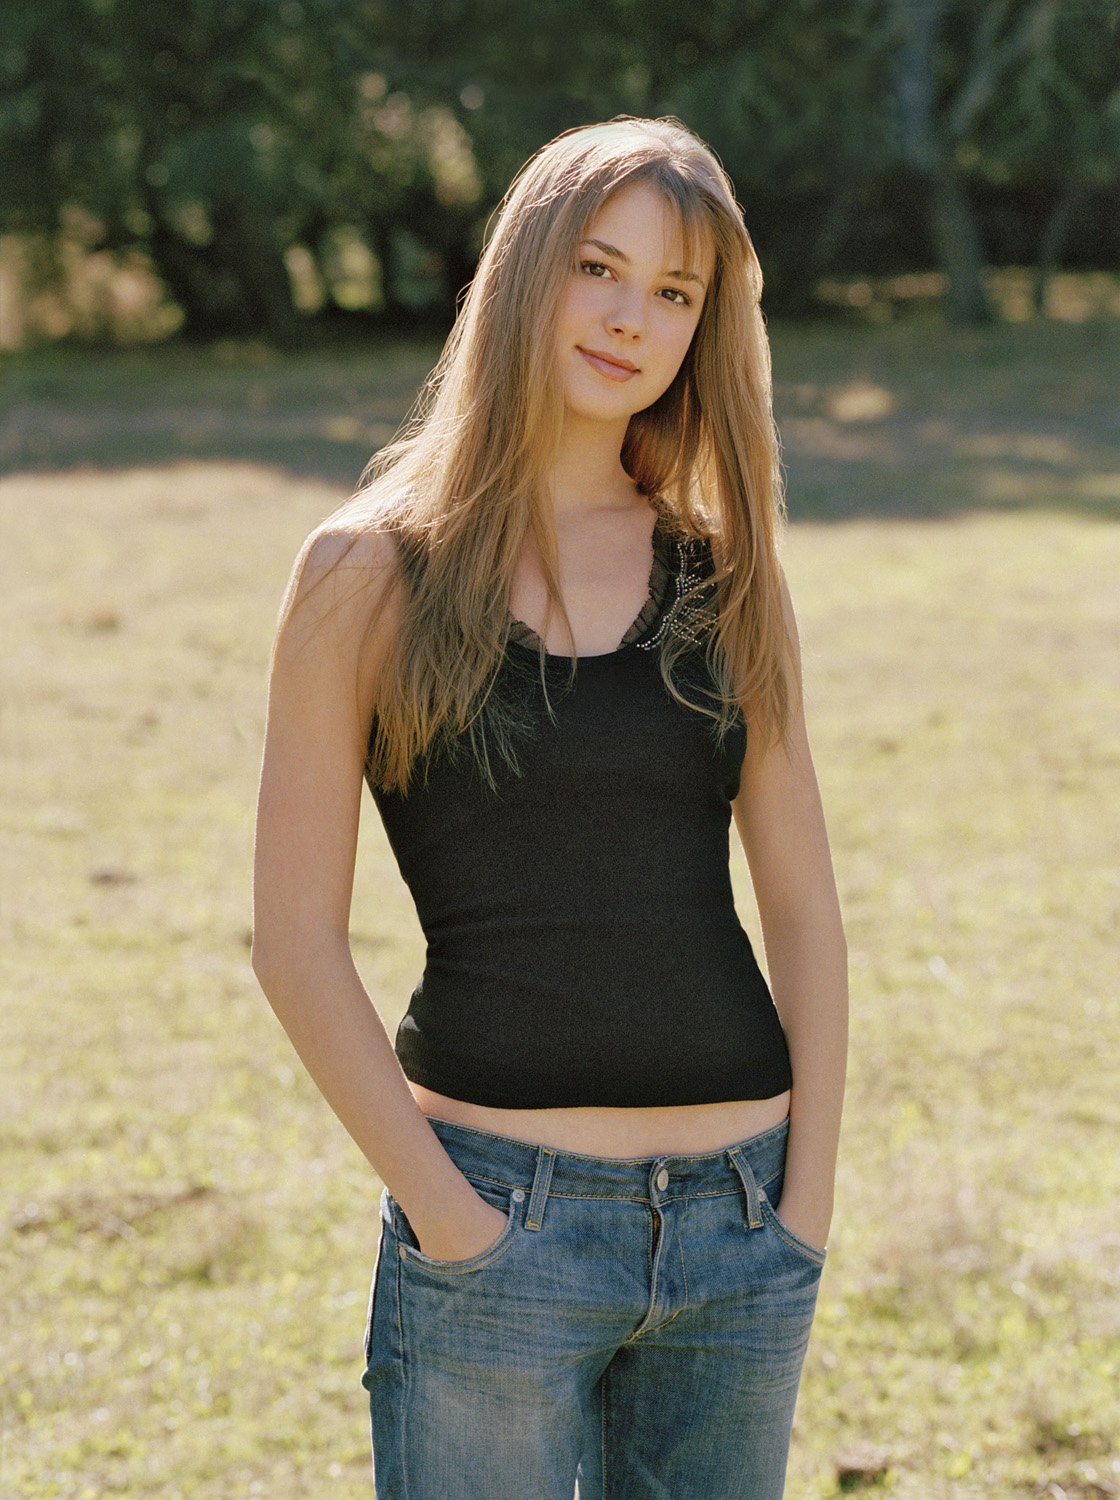 People 1120x1500 Emily Vancamp women actress jeans long hair hands in pockets grass Canadian portrait display